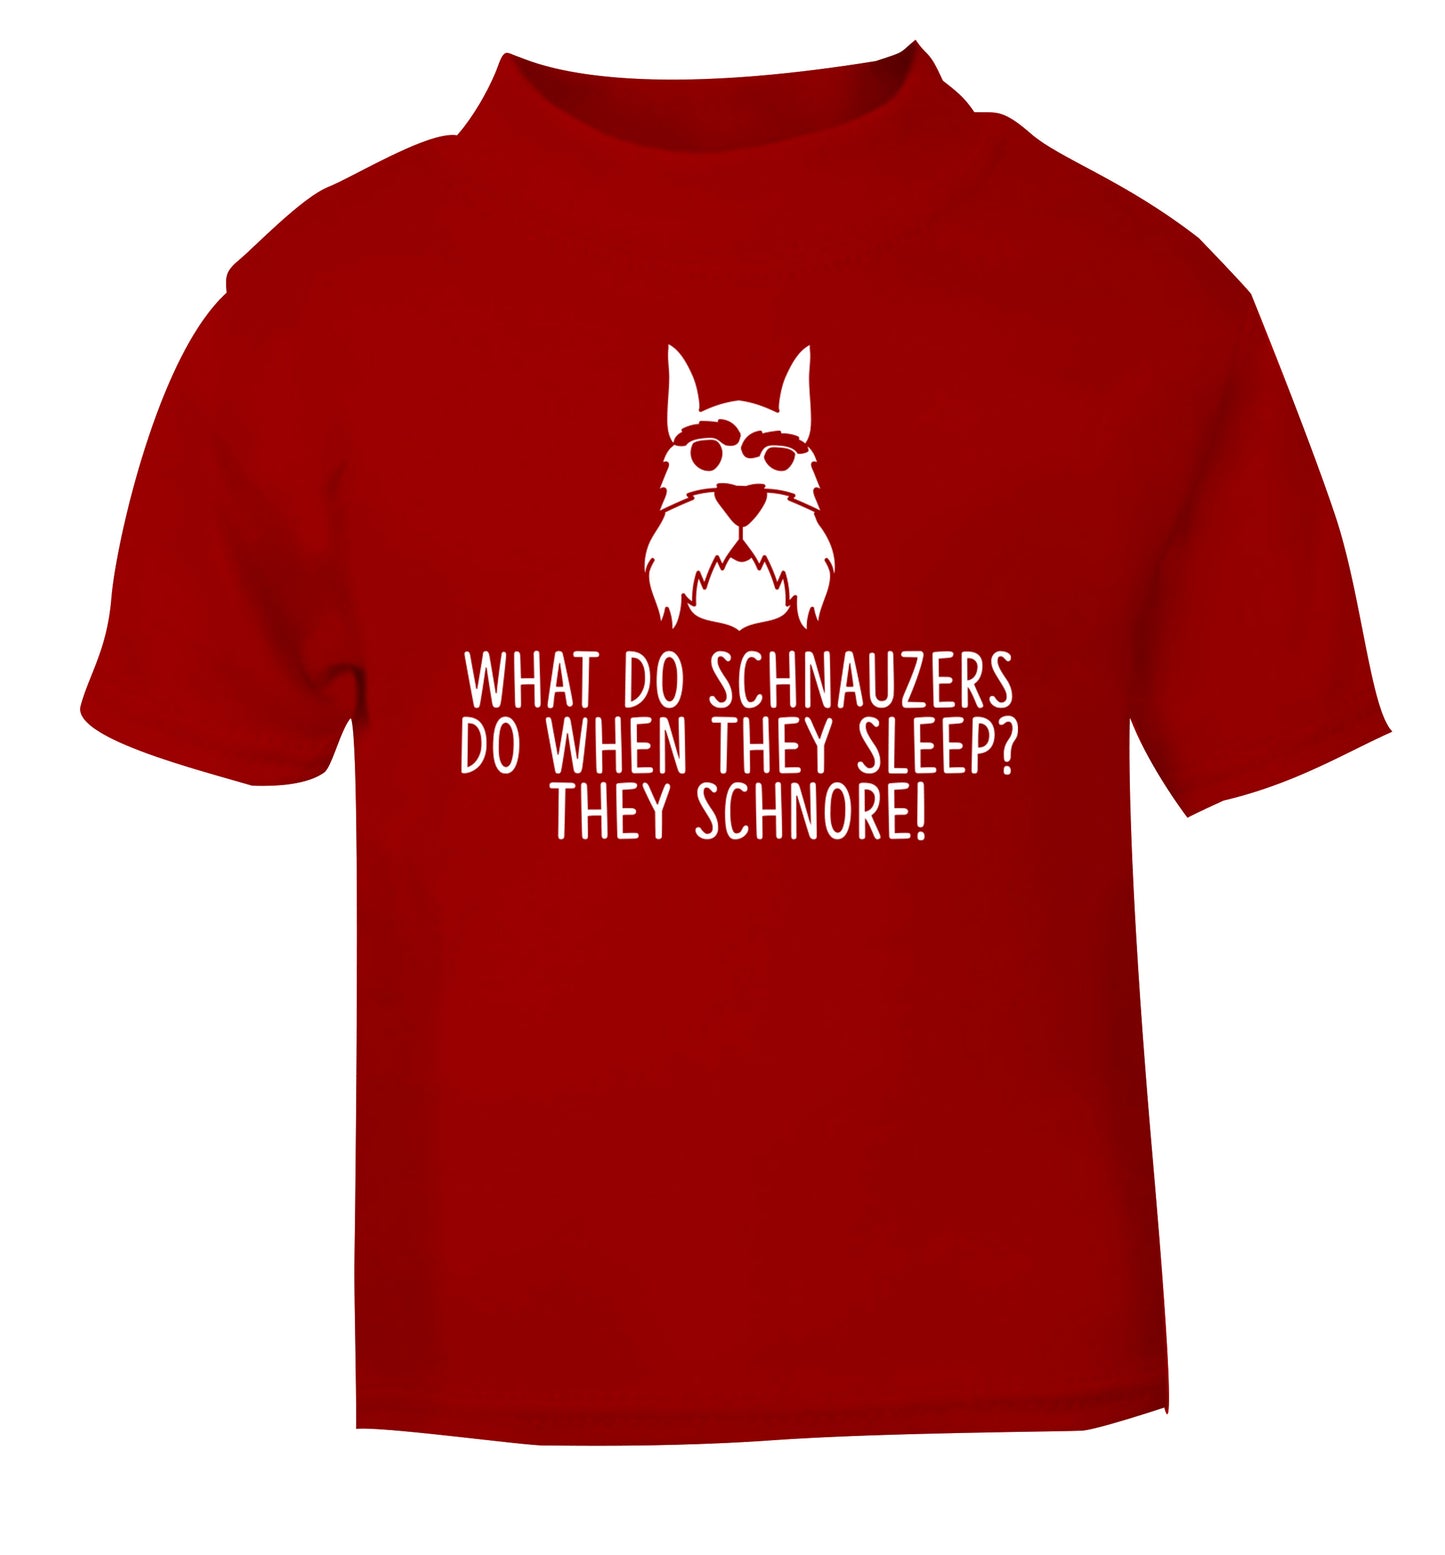 What do schnauzers do when they sleep? Schnore! red Baby Toddler Tshirt 2 Years